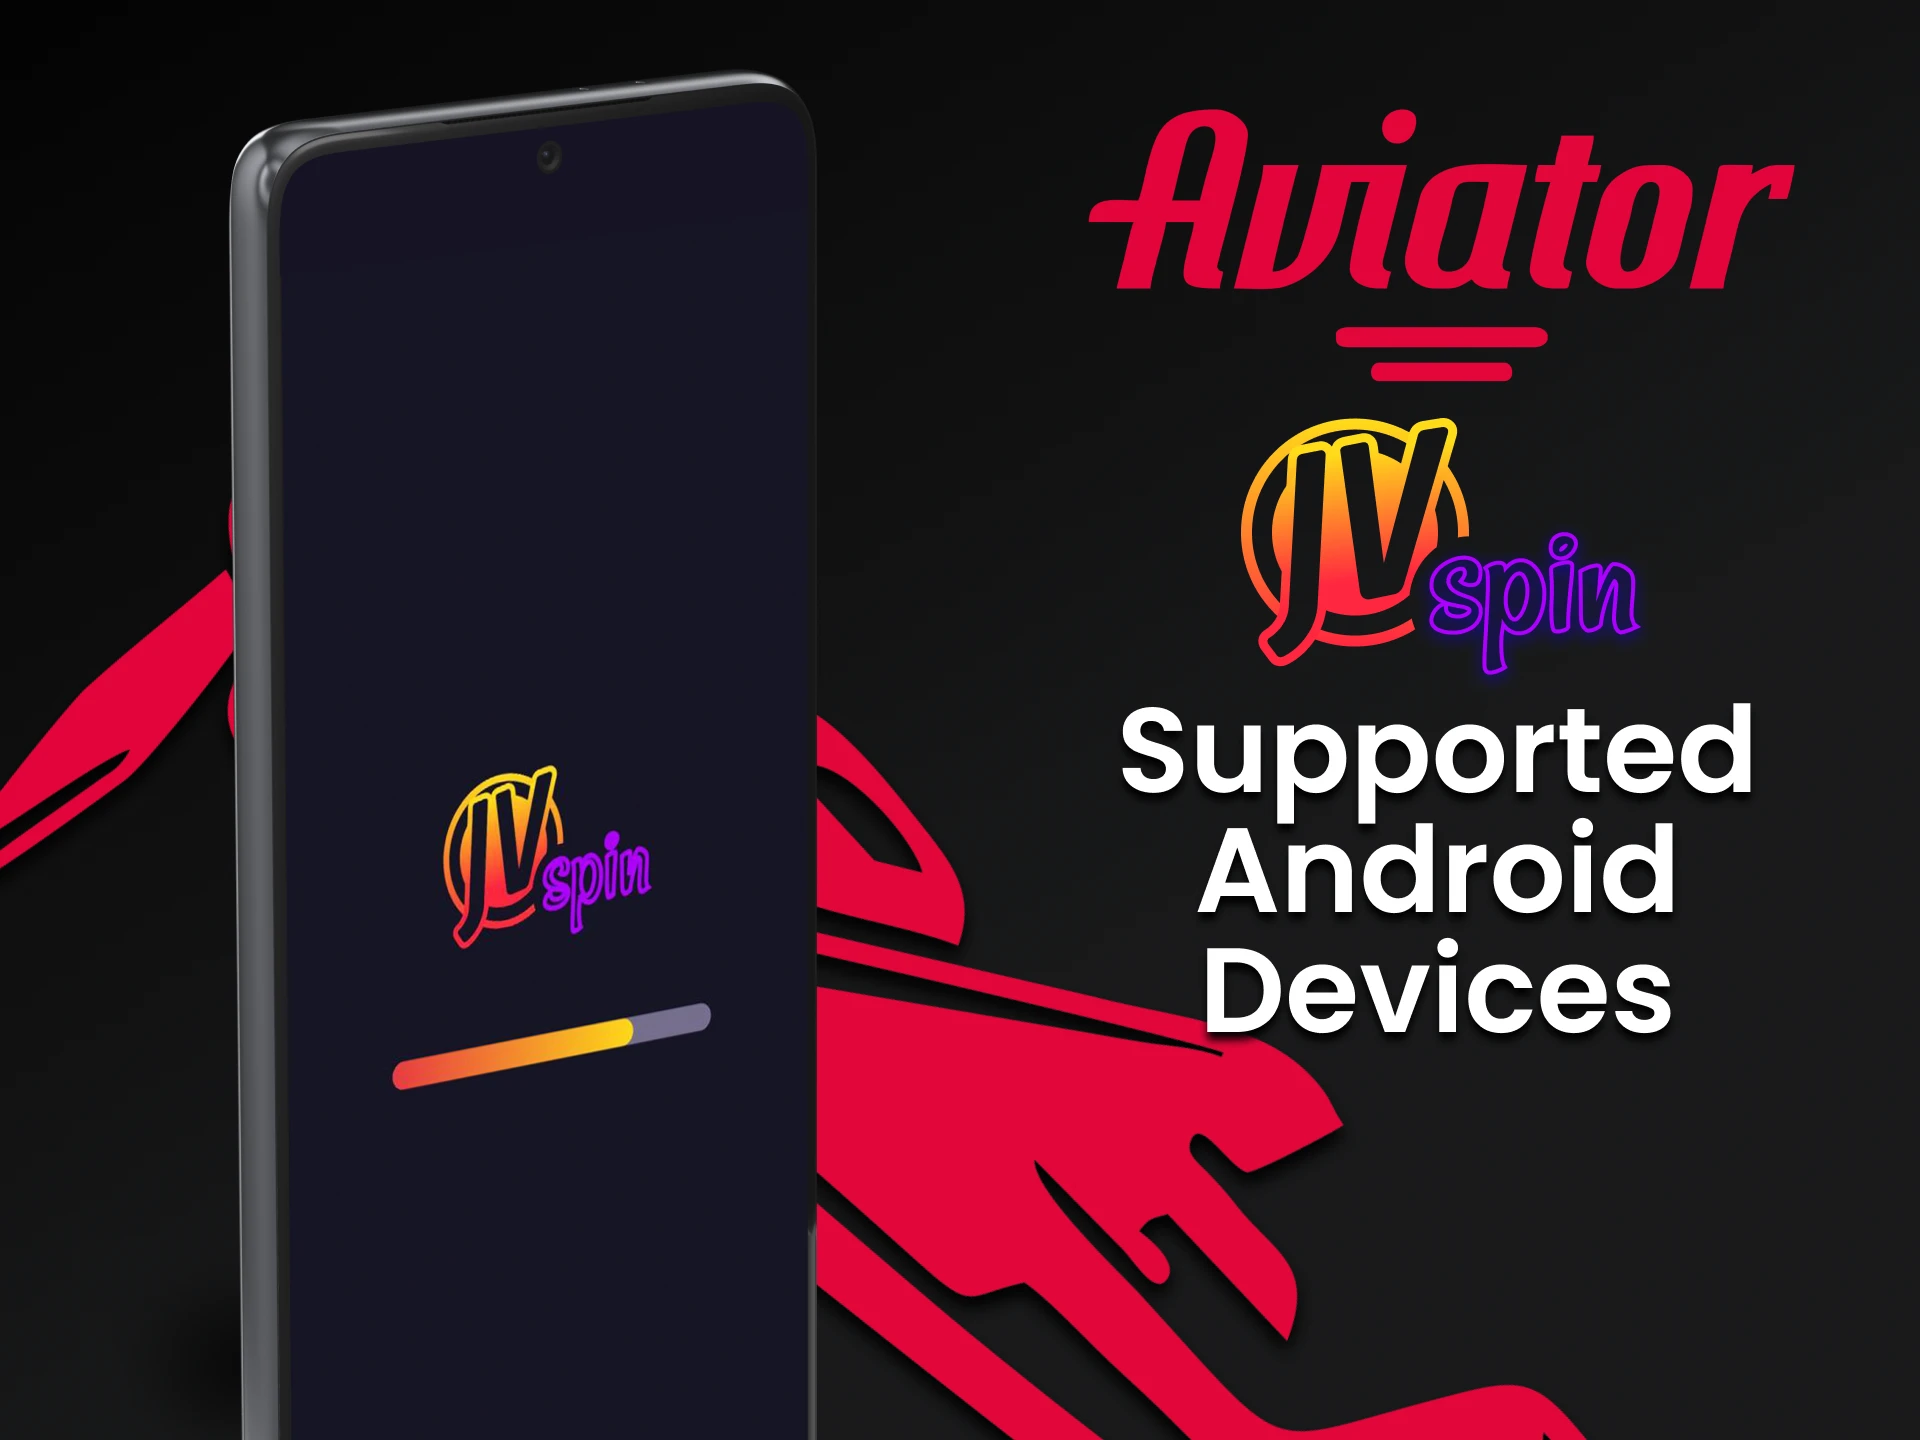 Choose Android devices to play Aviator in the JV Slot app.